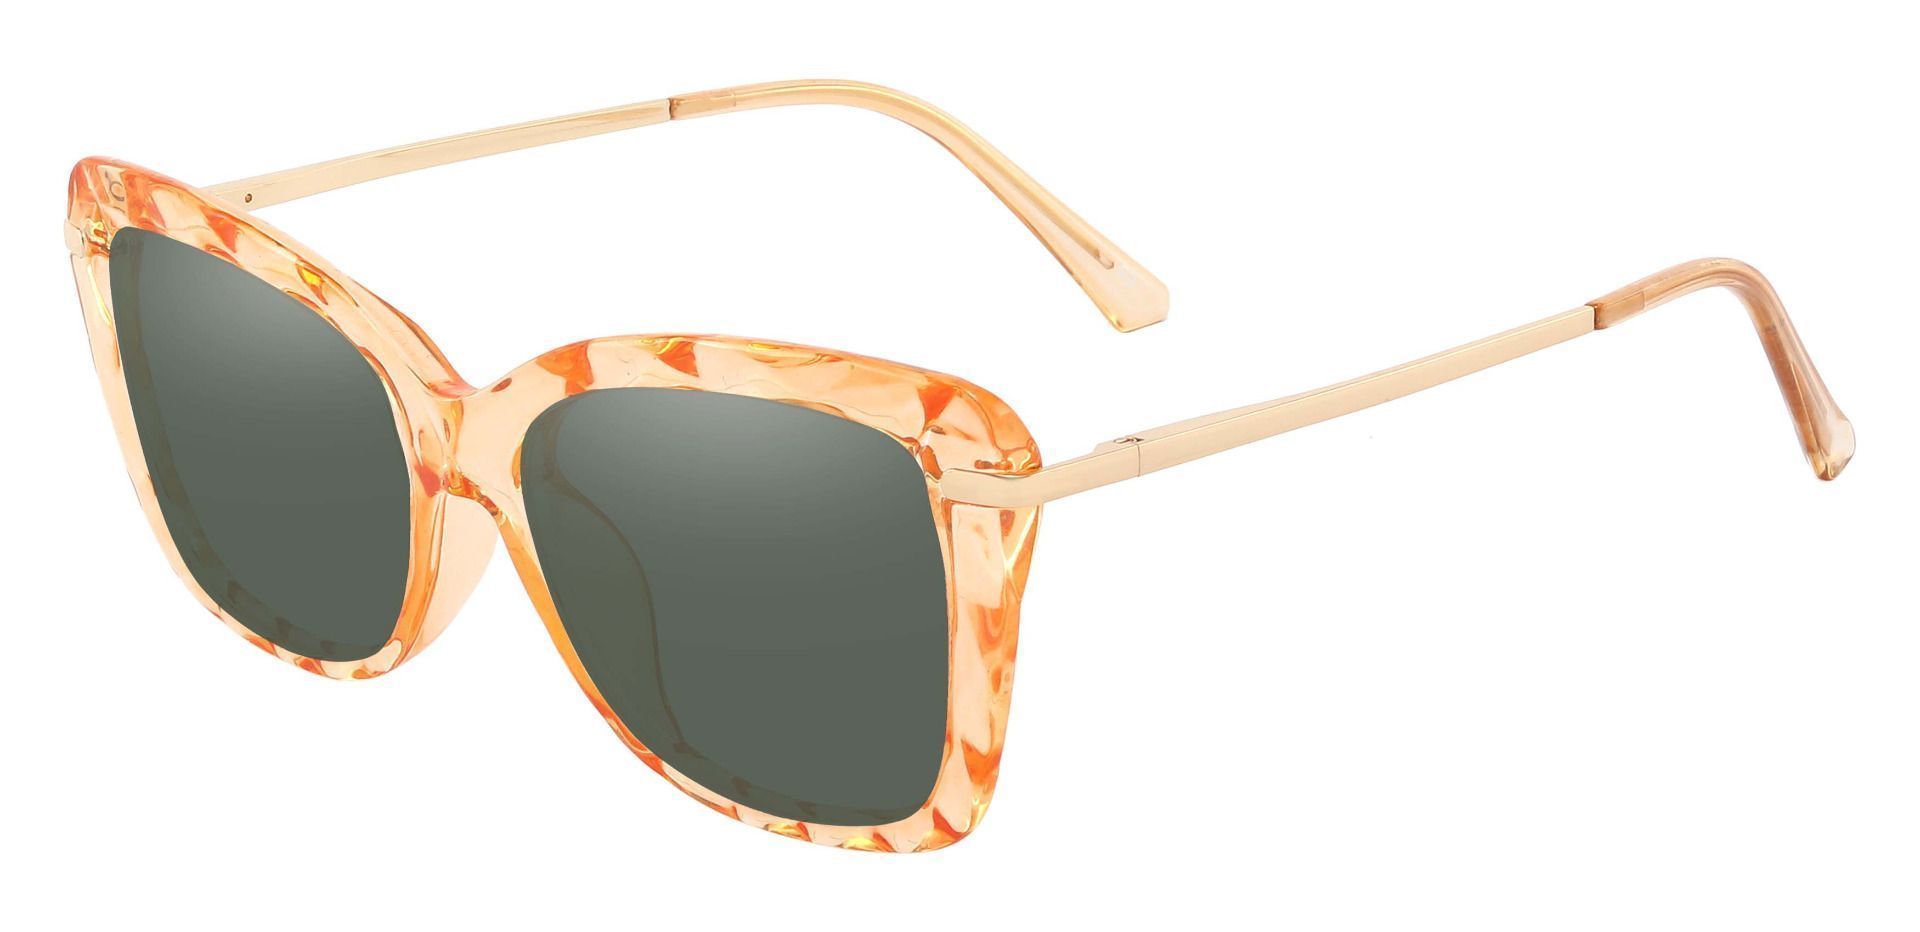 Shoshanna Rectangle Non-Rx Sunglasses - Brown Frame With Green Lenses